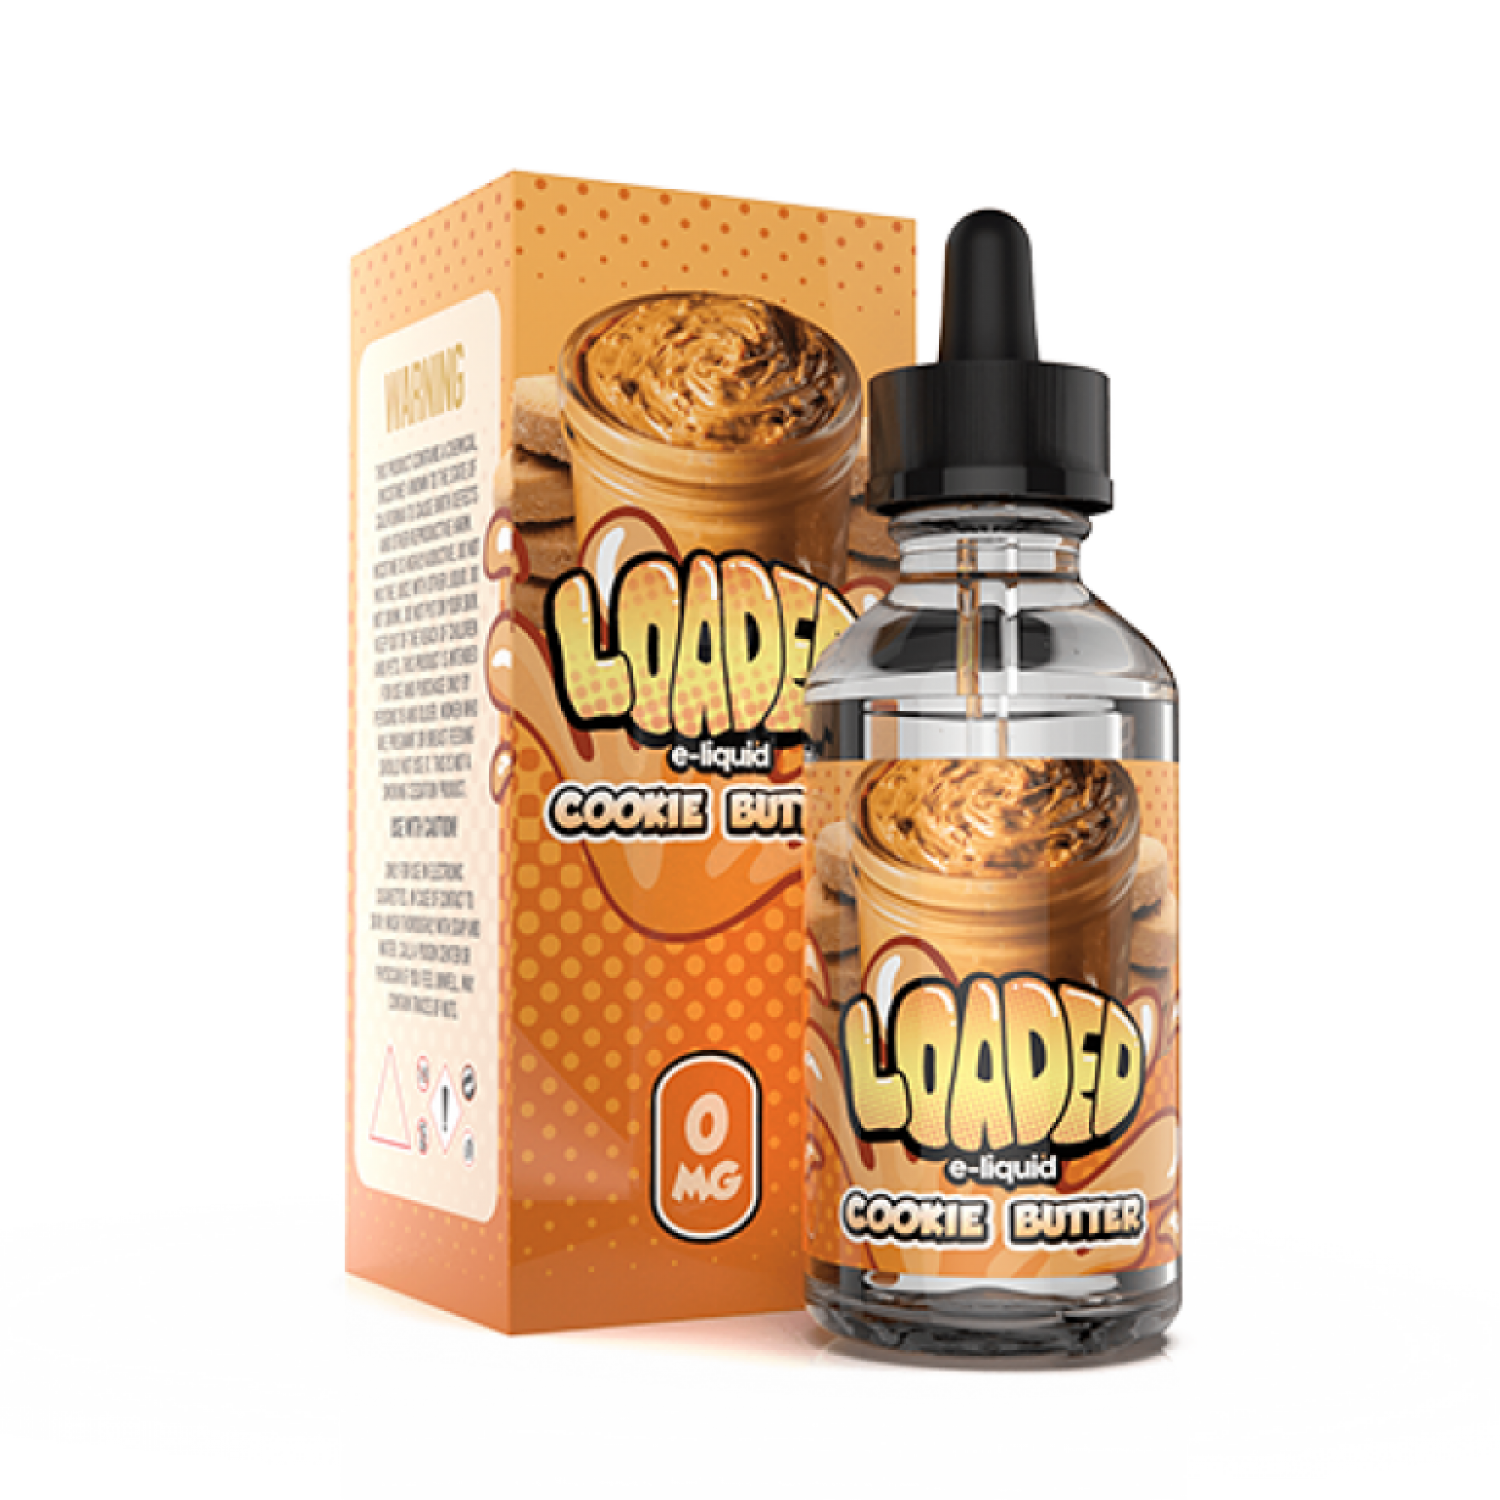 Loaded - Cookie Butter 120 ML. Premium Likit